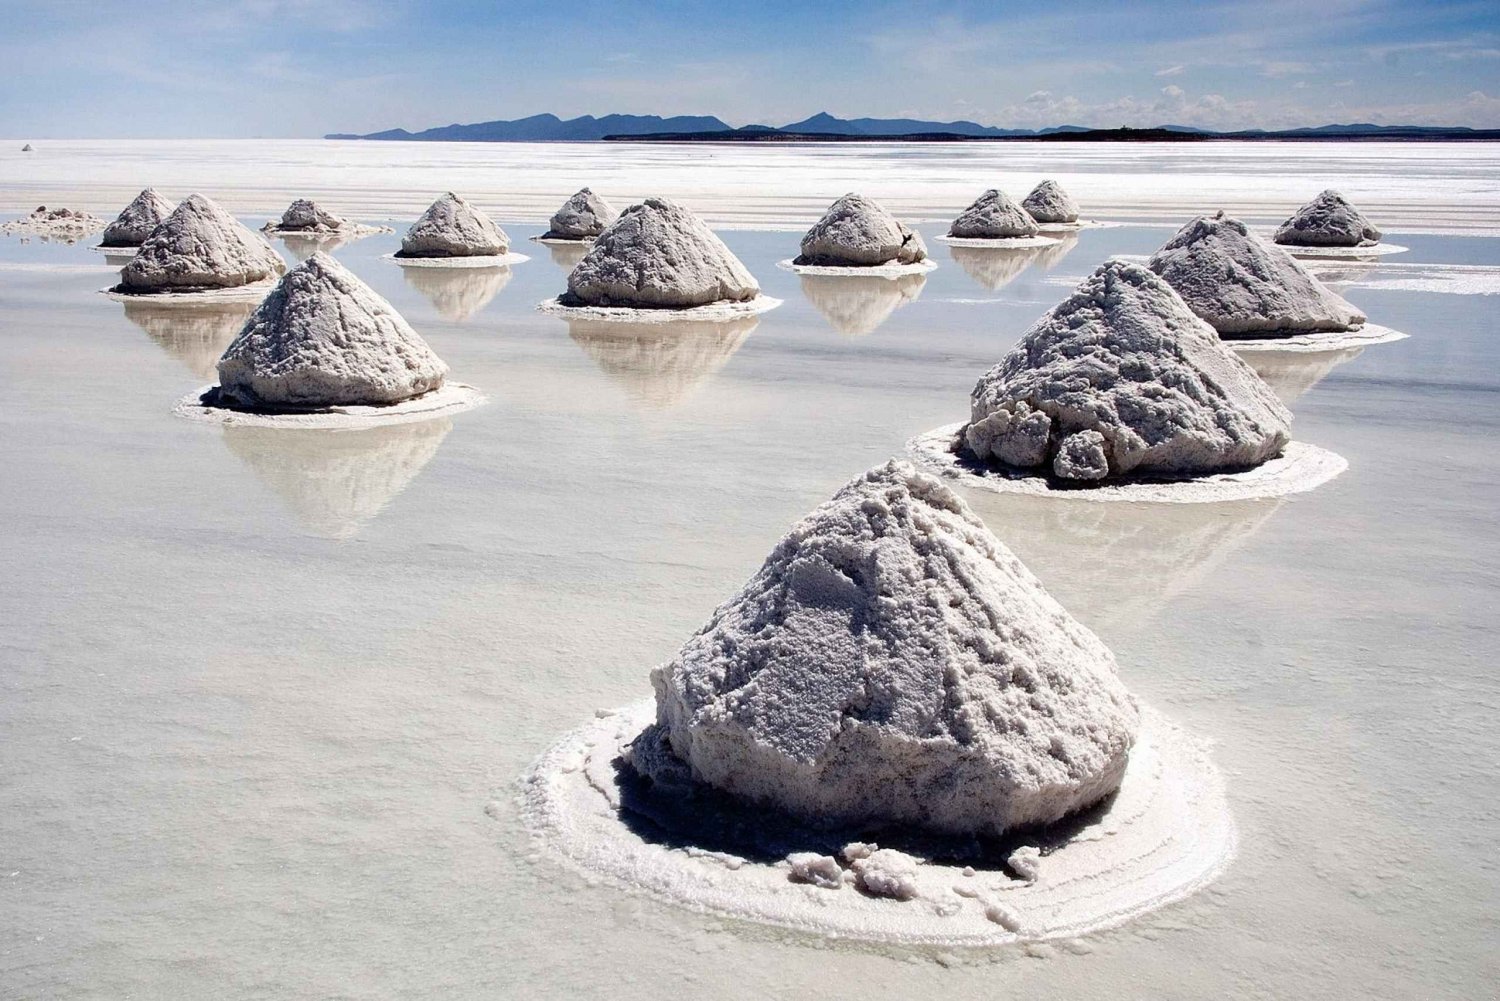 Salar, Colored Lagoon 3D Shared Tour_Guide in English